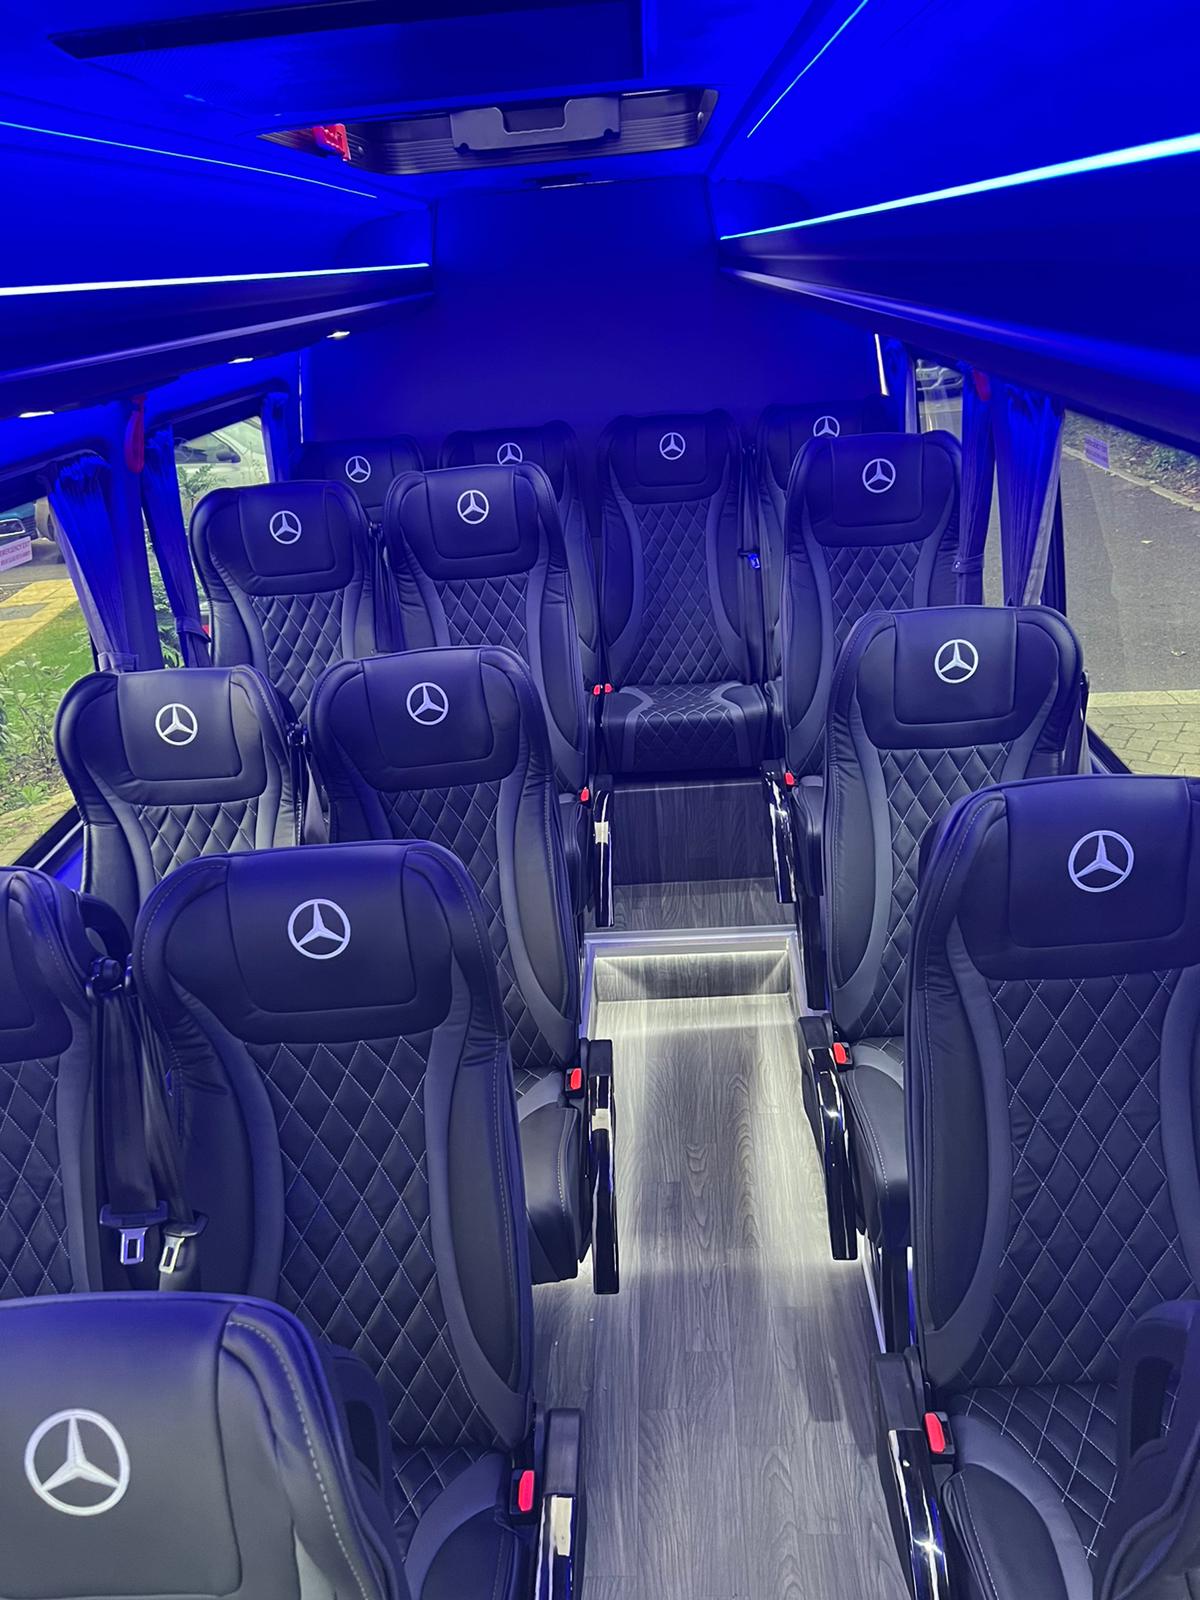 What to Expect When Hiring a 16 Seater Minibus in Norwich and Norfolk